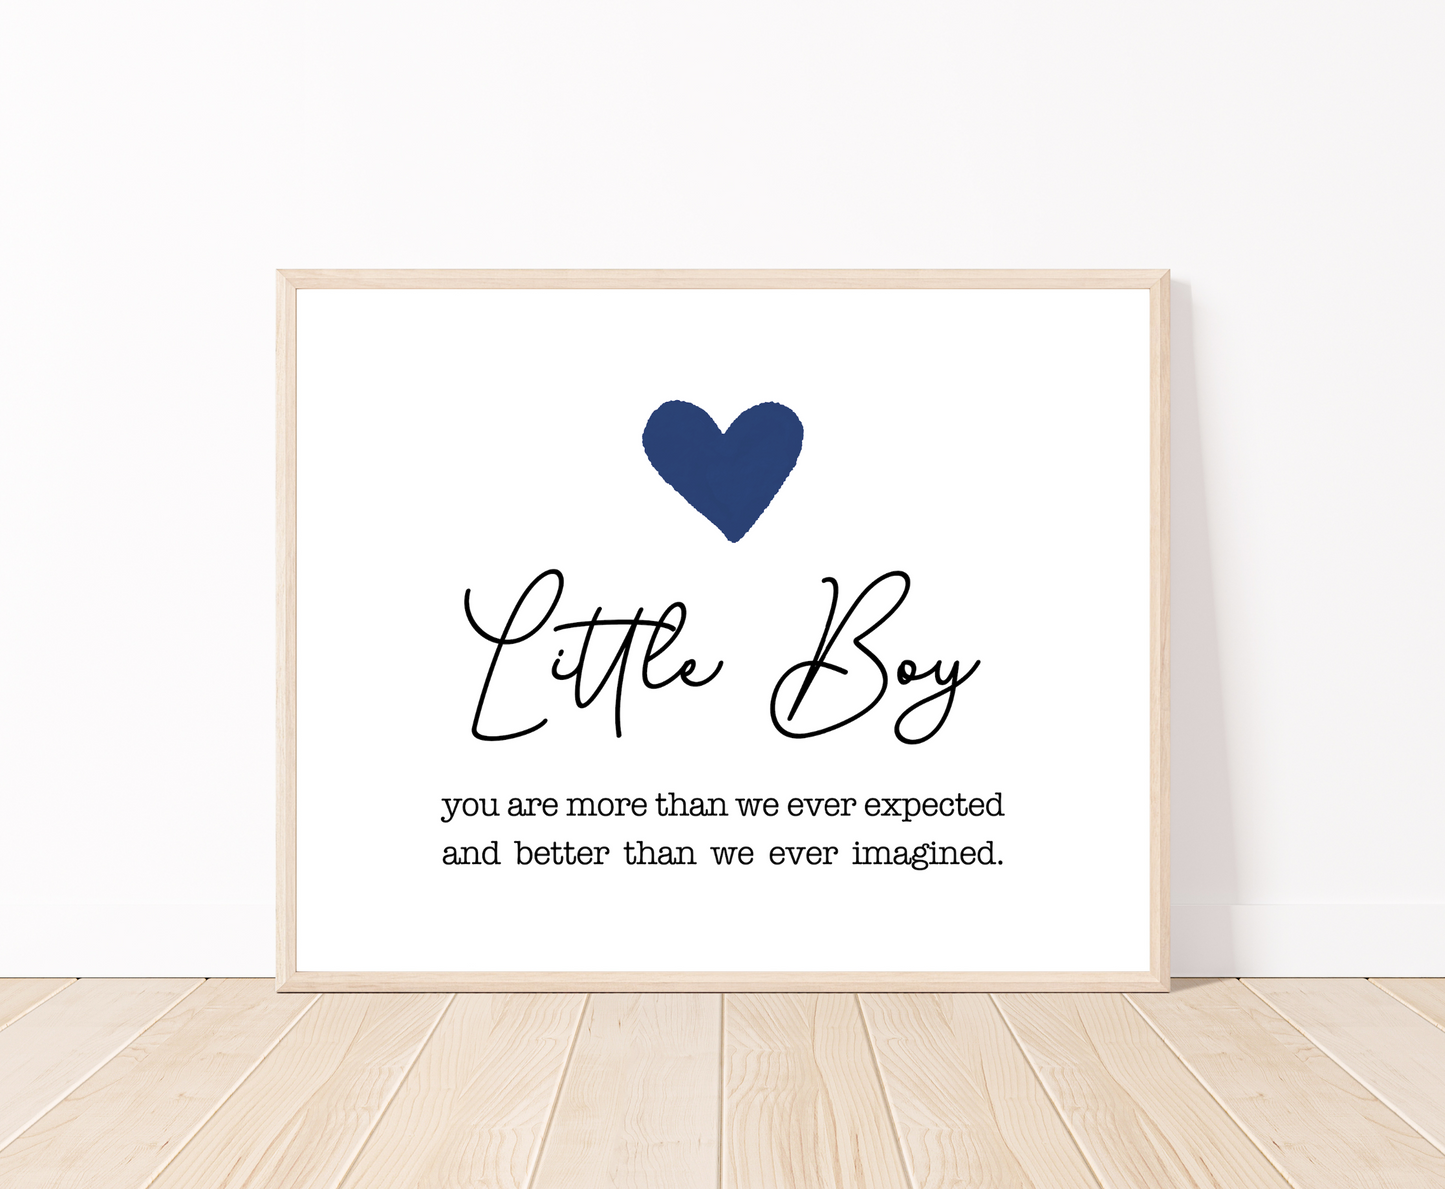 A graphic showing a dark blue heart, with a piece of writing that says, “Little boy, you are more than we ever expected, and better than we ever imagined.”